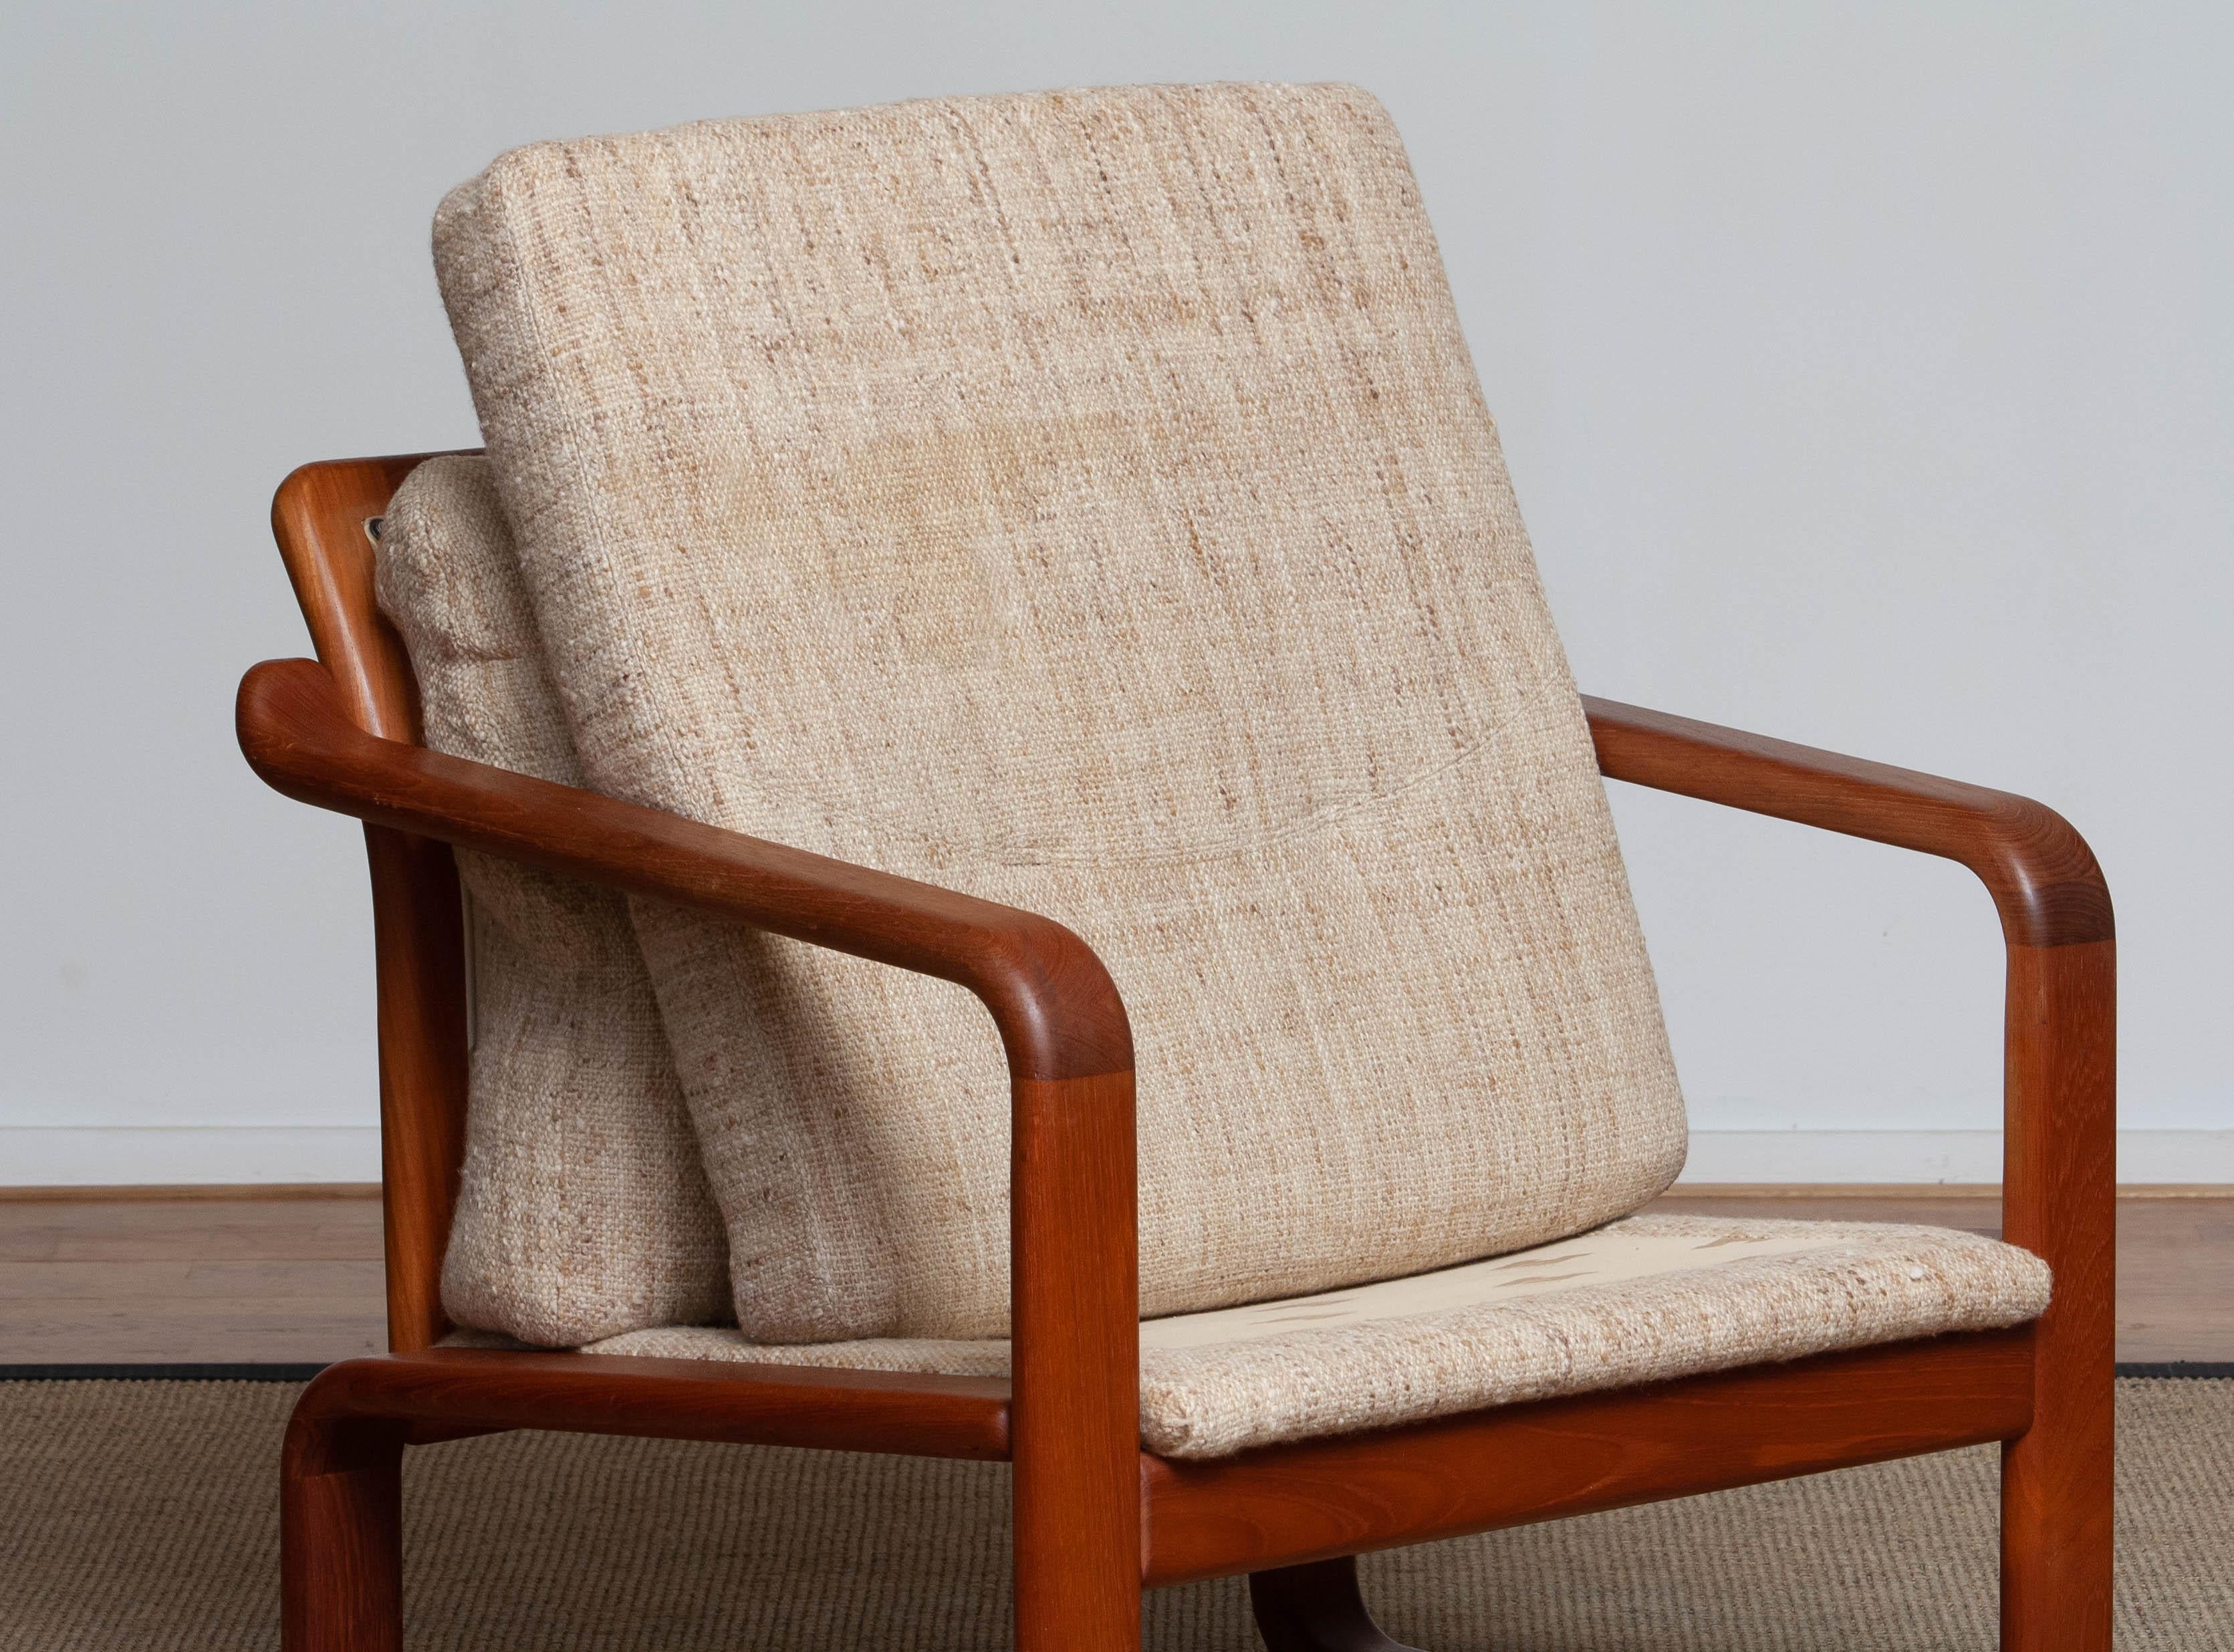 1980's Teak with Wool Cushions Lounge / Easy / Club Chair by Hs Design, Denmark For Sale 1